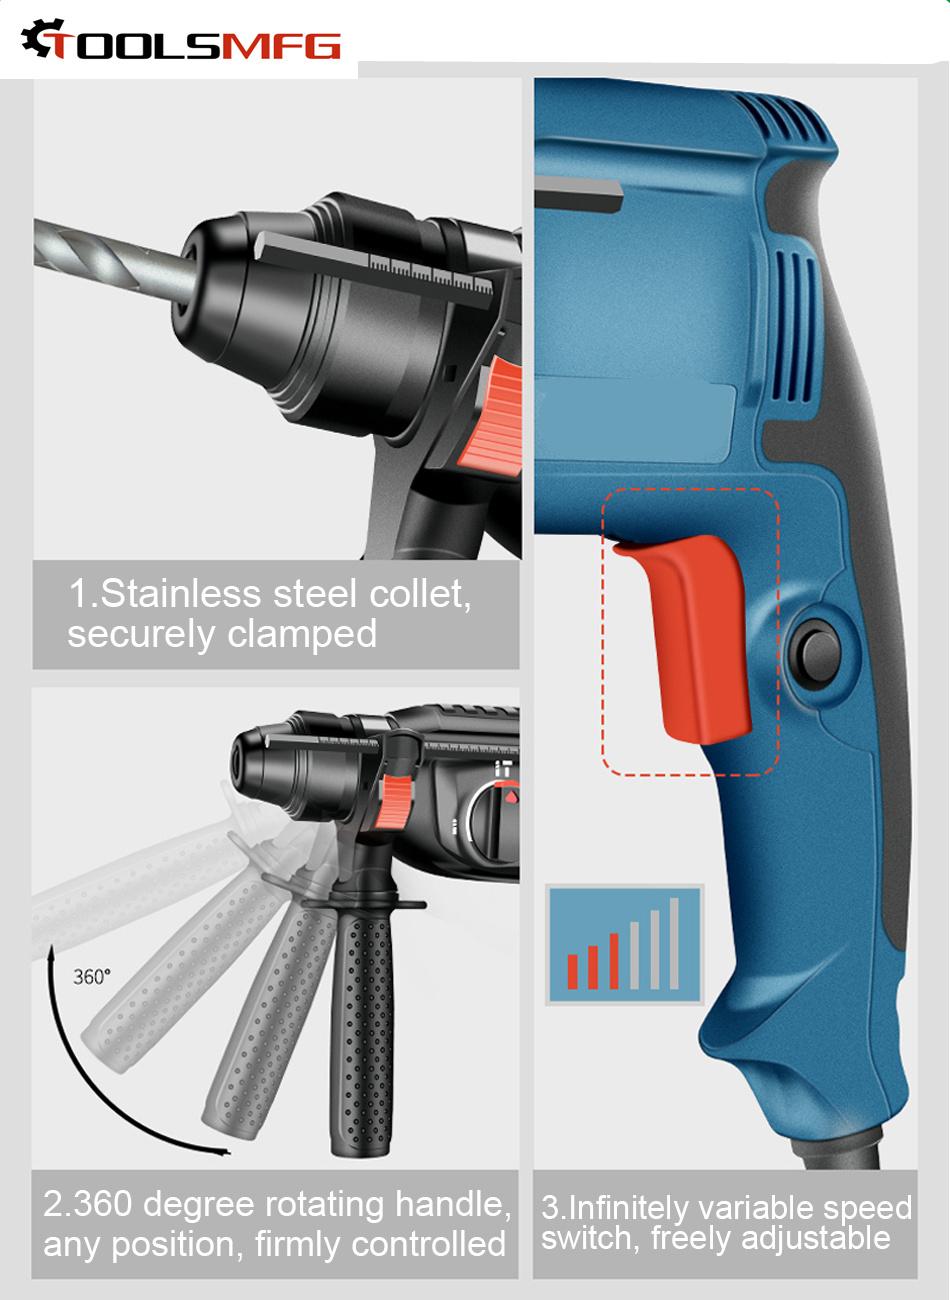 Toolsmfg 26mm 800W SDS Plus Power Electric Rotary Hammer